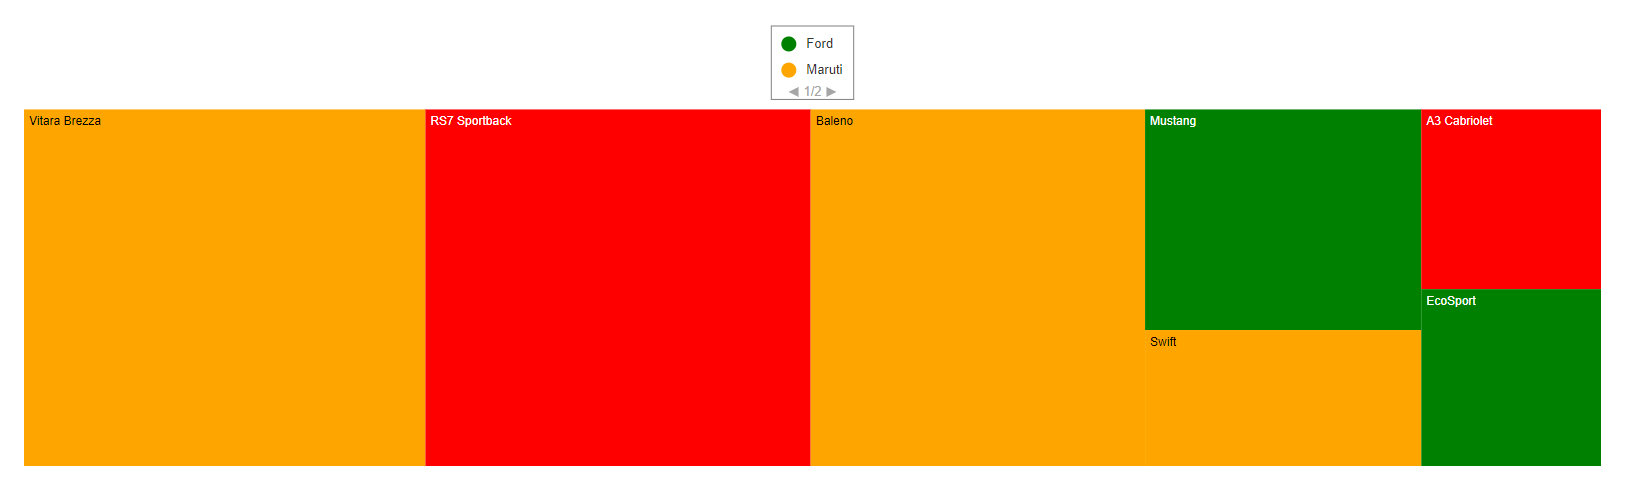 TreeMap legend with paging